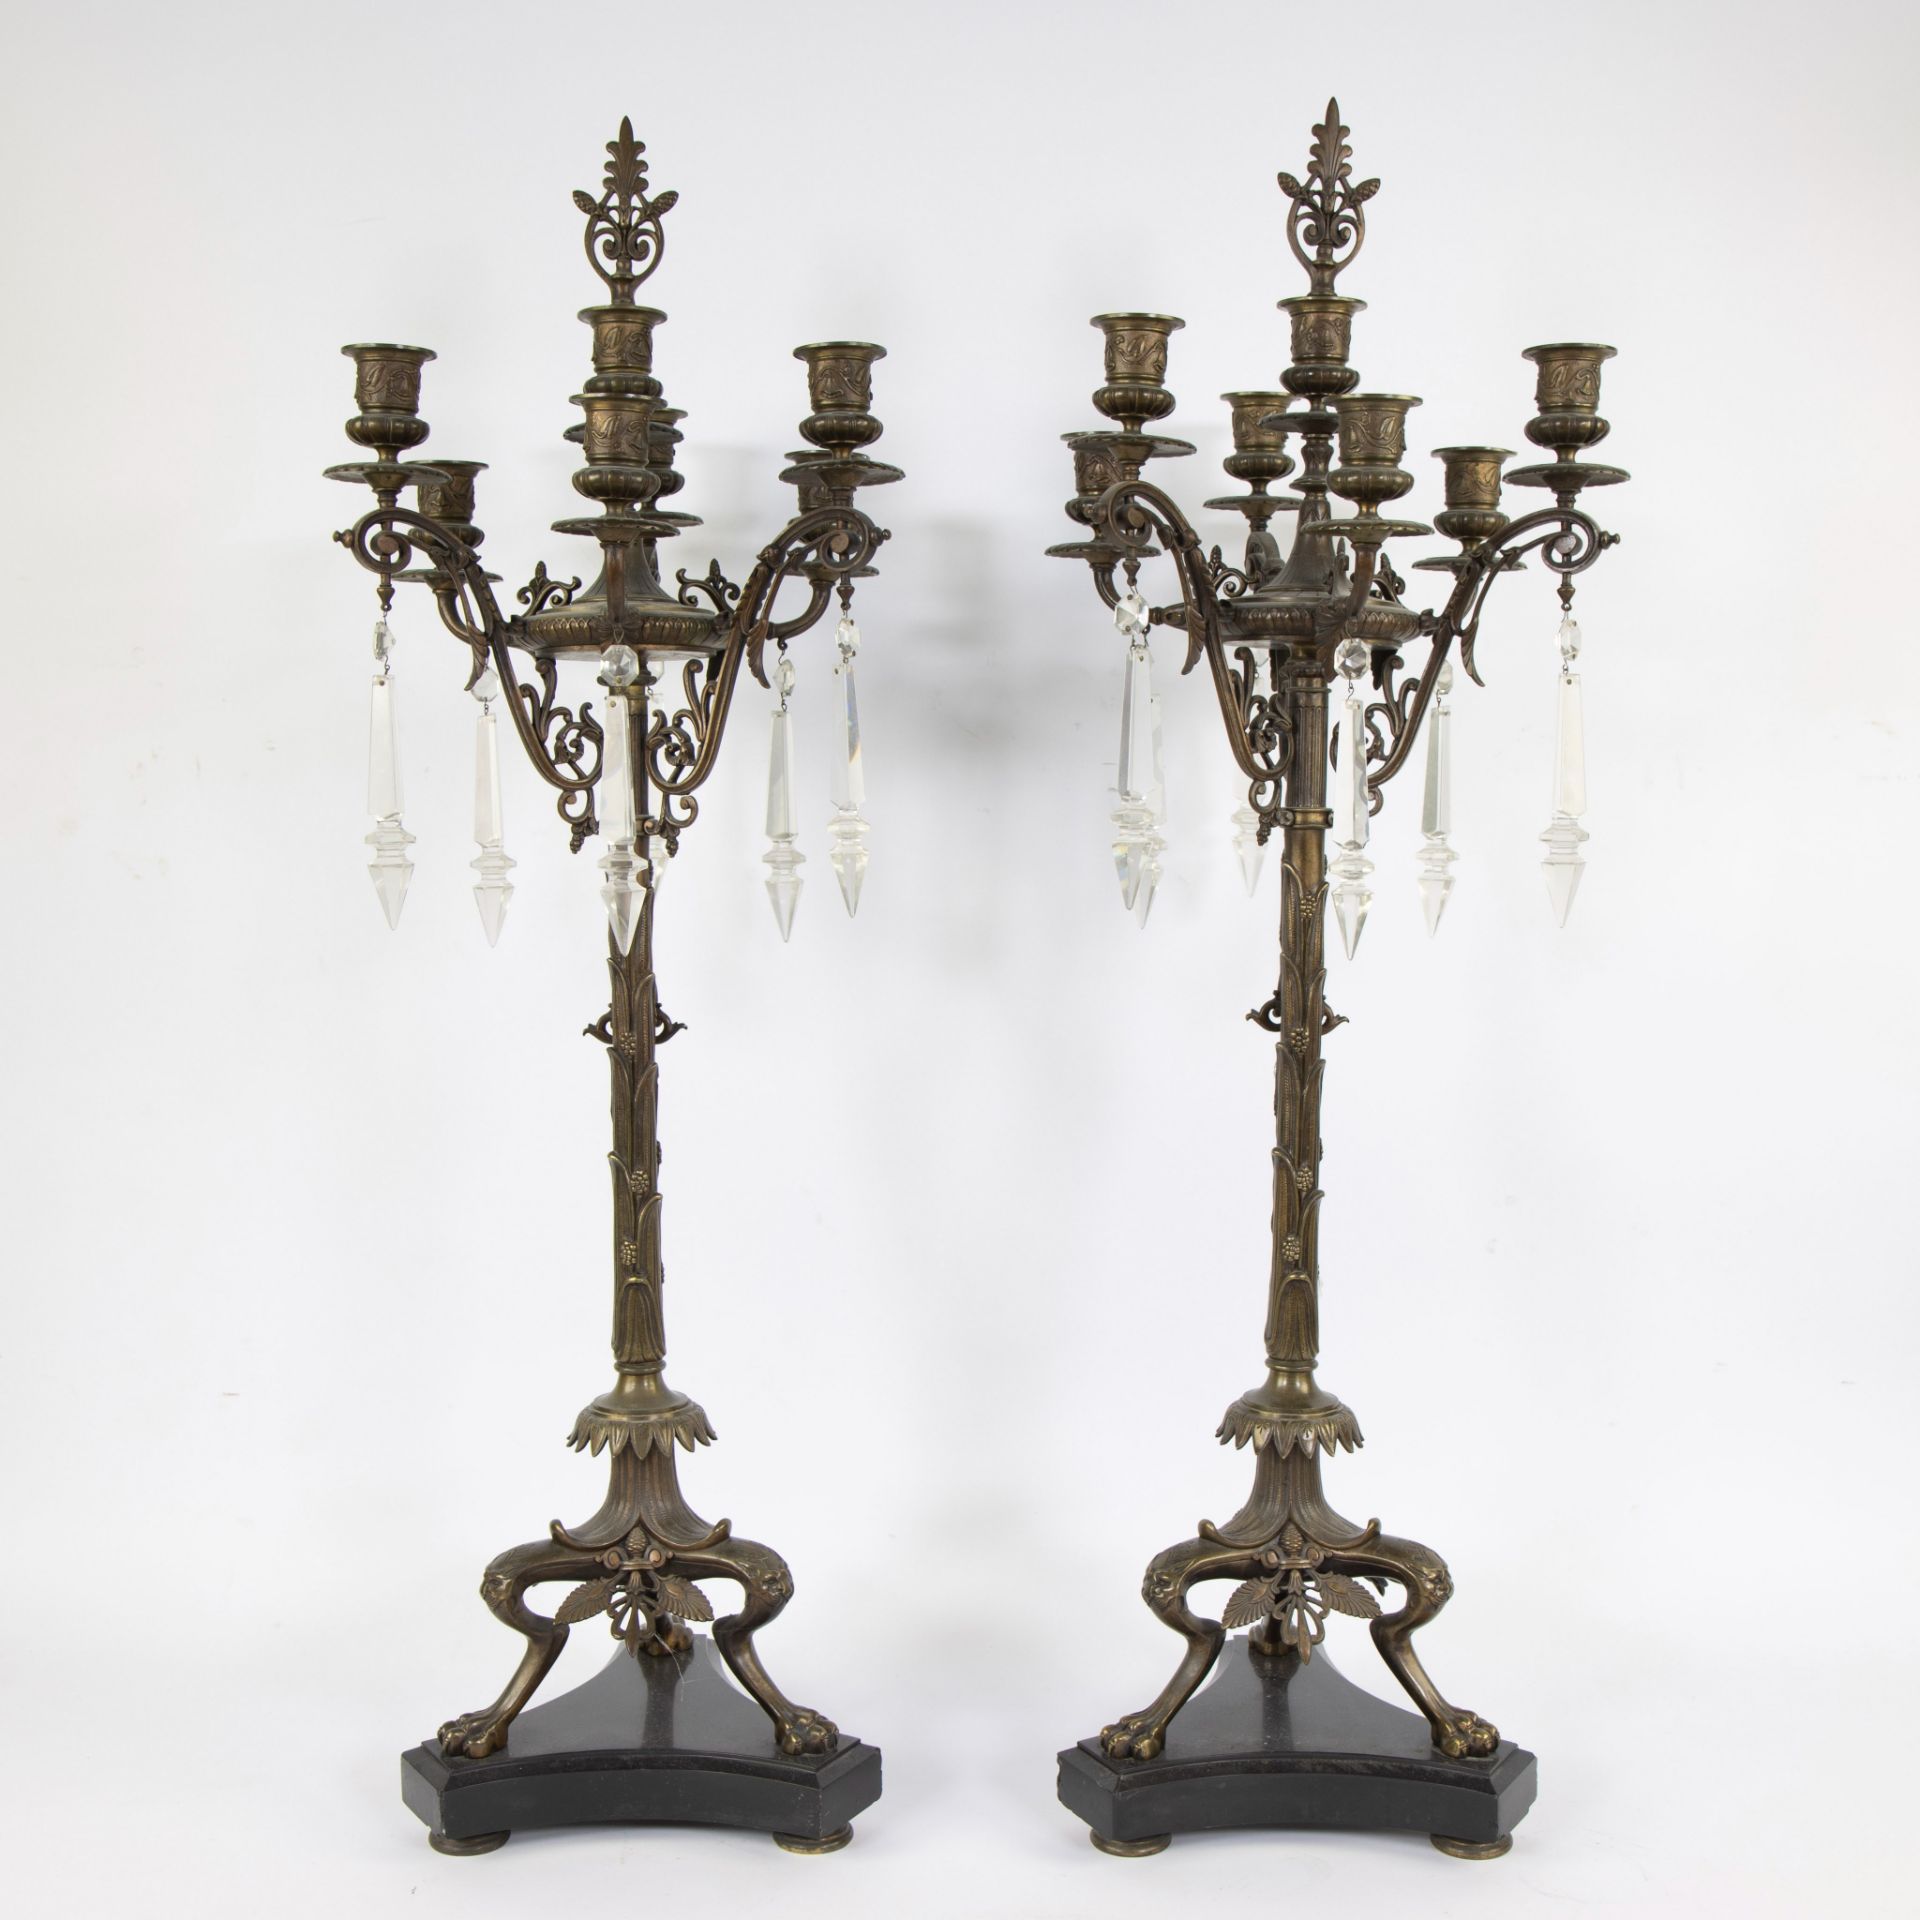 Two large rare solid bronze 19th century candlesticks with 7 light points, standing on claw feet and - Image 4 of 5